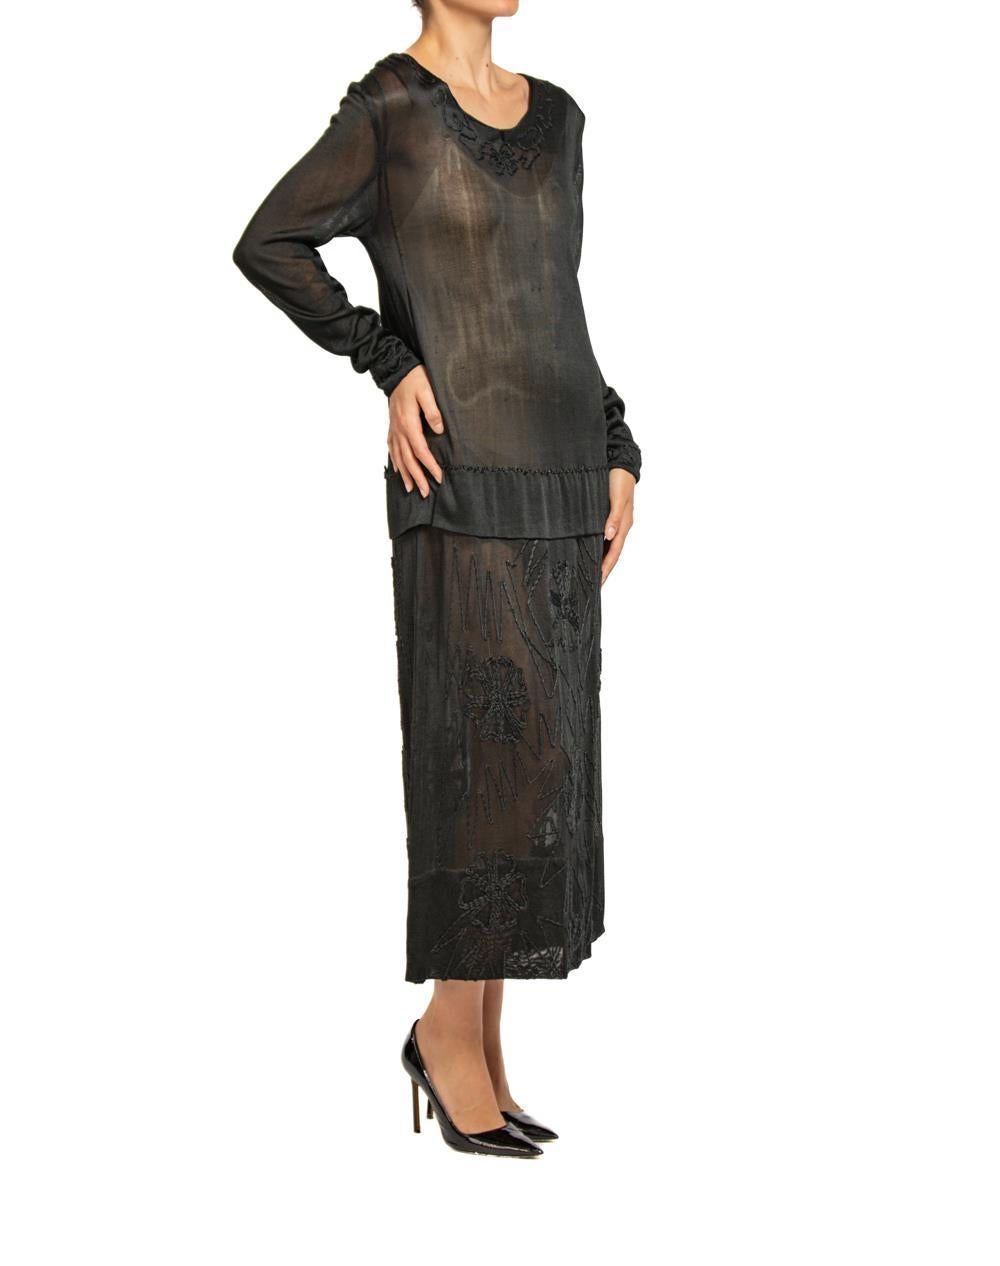 1920S Black Sheer Silk Jersey Dress With Floral Embroidery For Sale 4